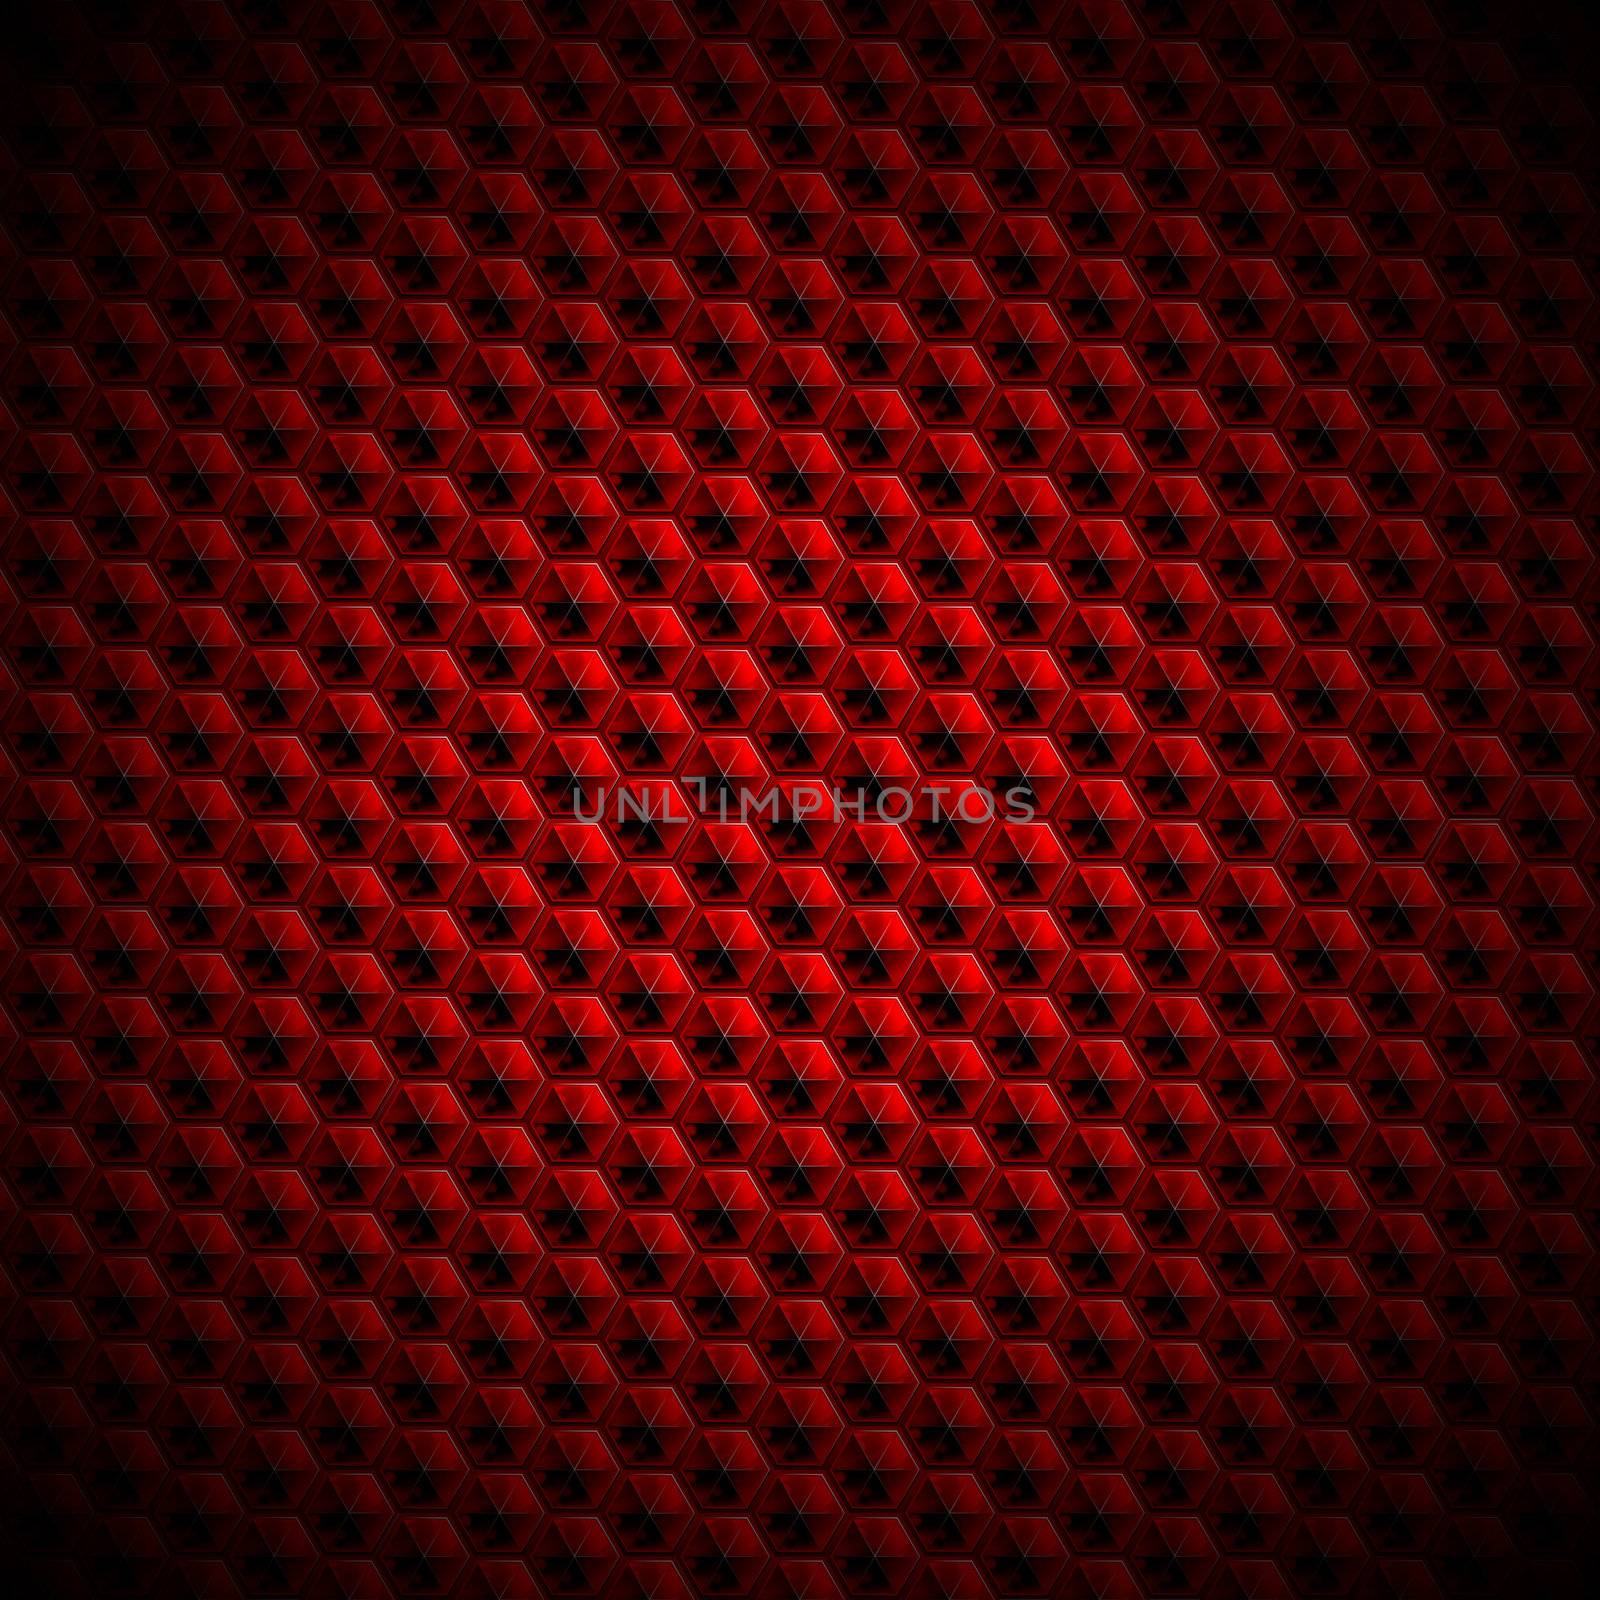 Black and red abstract background with hexagons, cubes and pyramids 